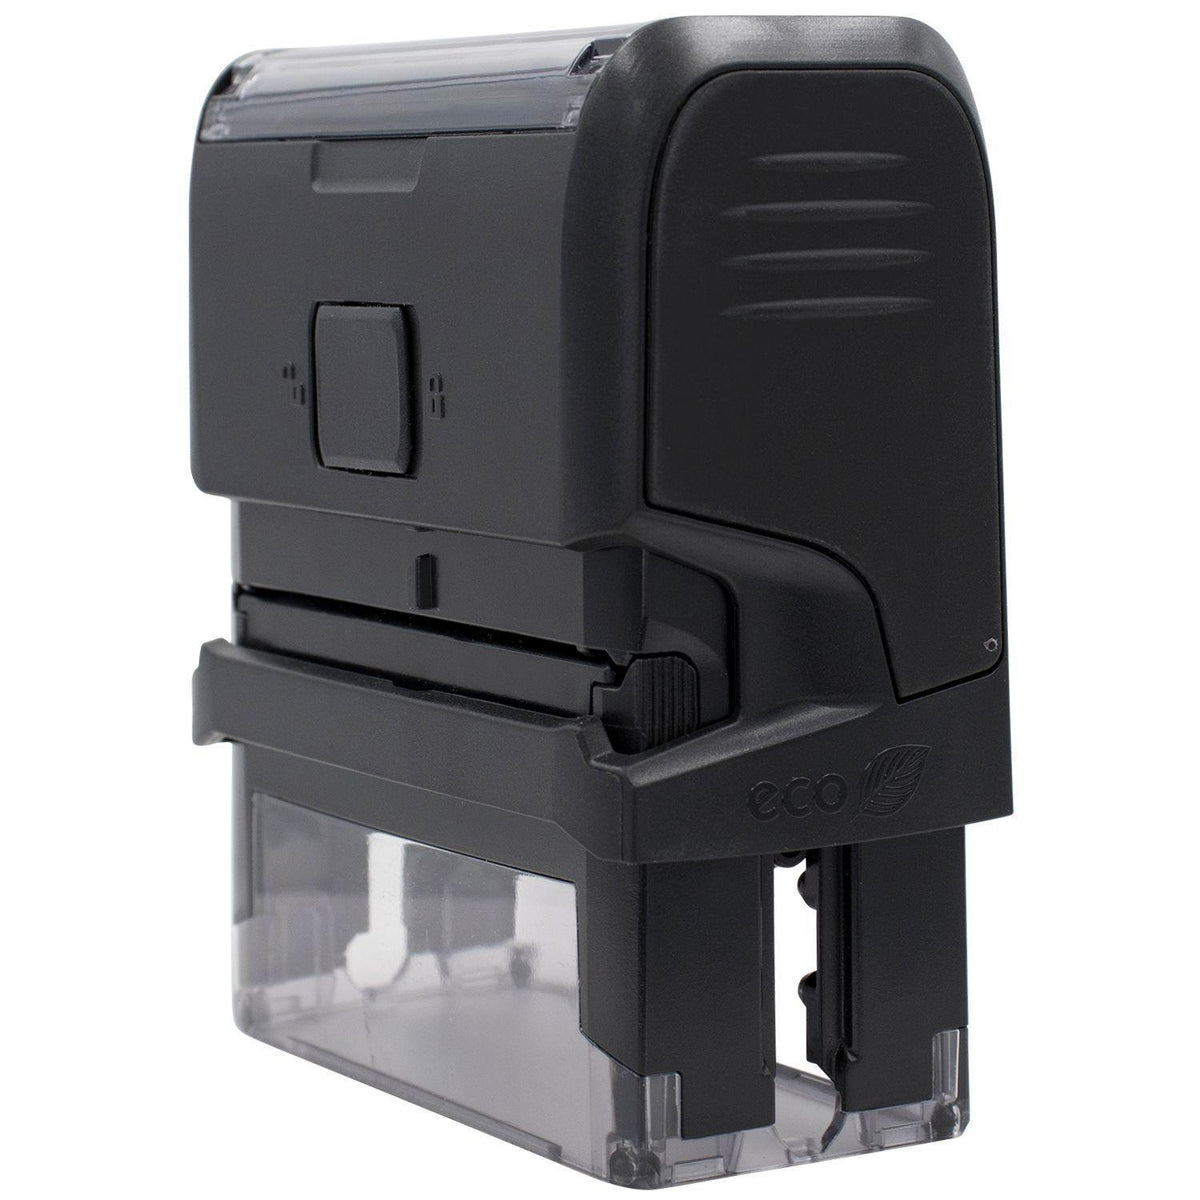 Side View of Large Self-Inking Bold Paid Stamp at an Angle